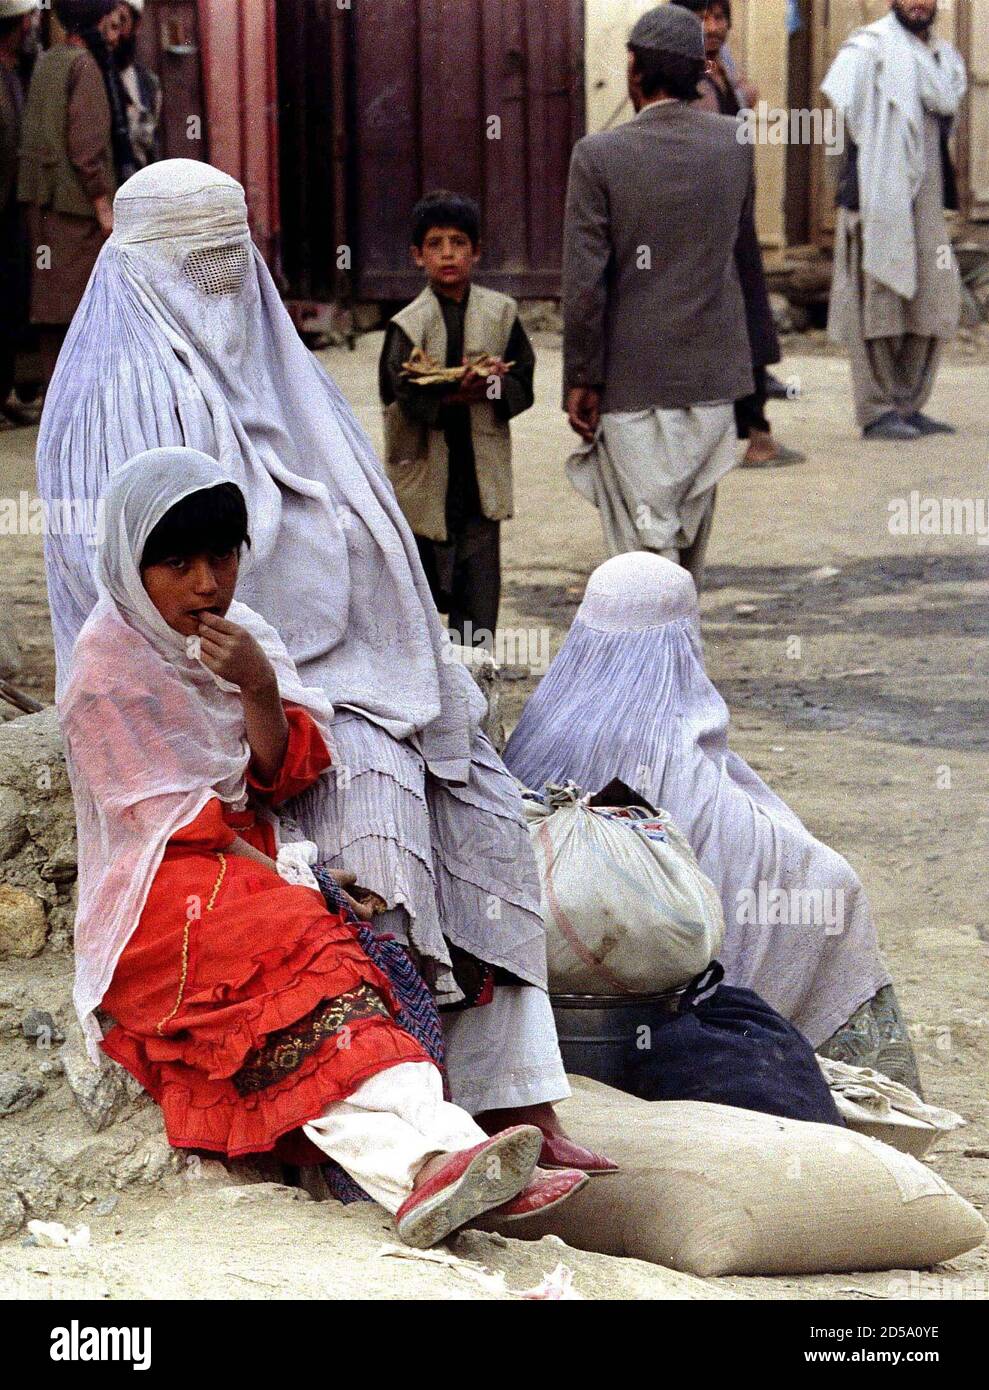 Afghan women, wearing burqas, covering their faces sit next to a young girl in this city 60km north of Kabul October 2. The radical Taliban militia that conquered Kabul last week has begun enforcing a purist proud of Islam that has struck fear into many educated people, especially women. Stock Photo